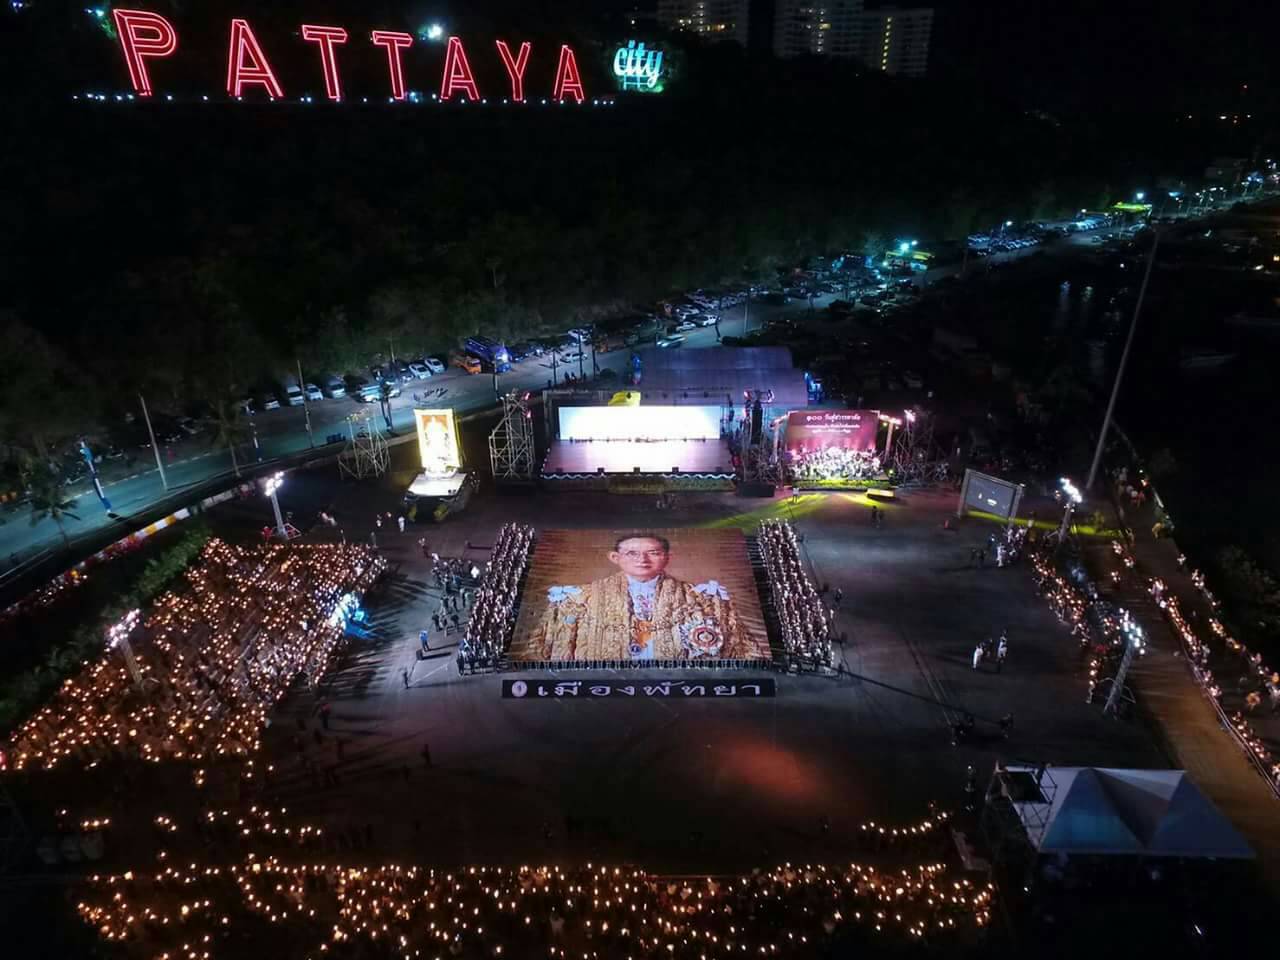 The area’s largest and arguably most beautiful commemoration took place at Bali Hai Pier.